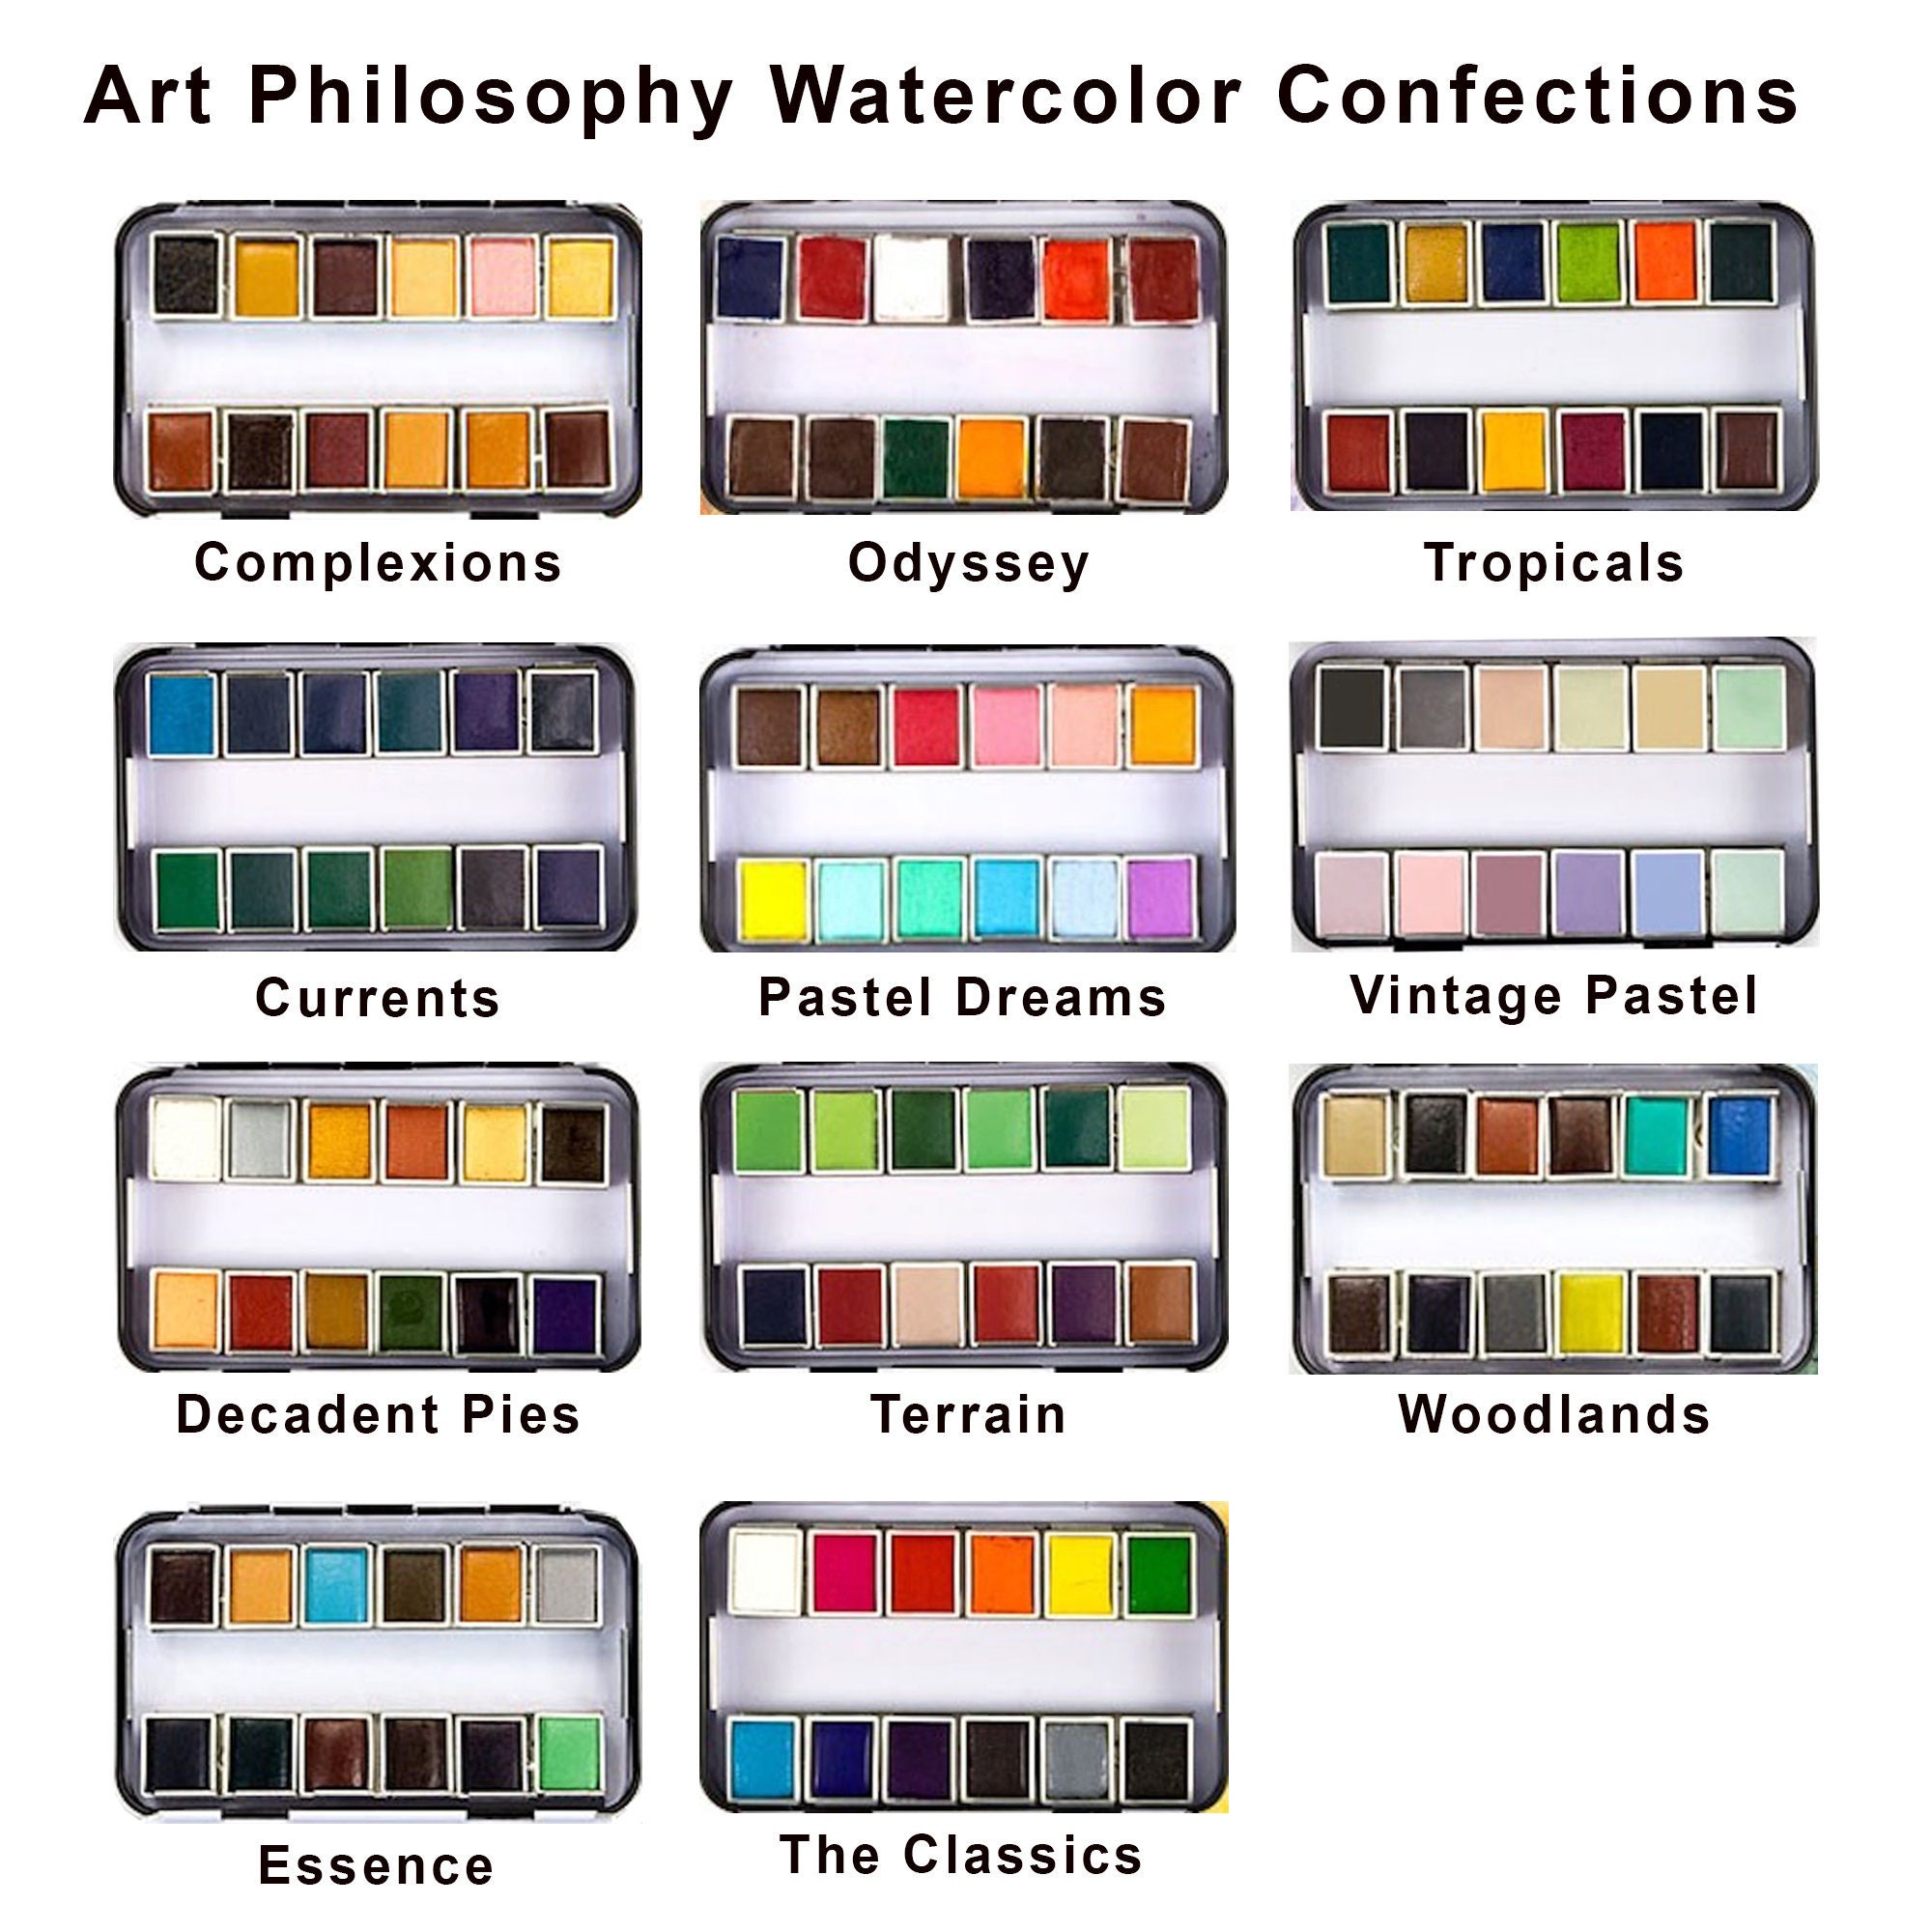 The Classics Palette - Watercolor Confections Series by Art Philosophy Co 